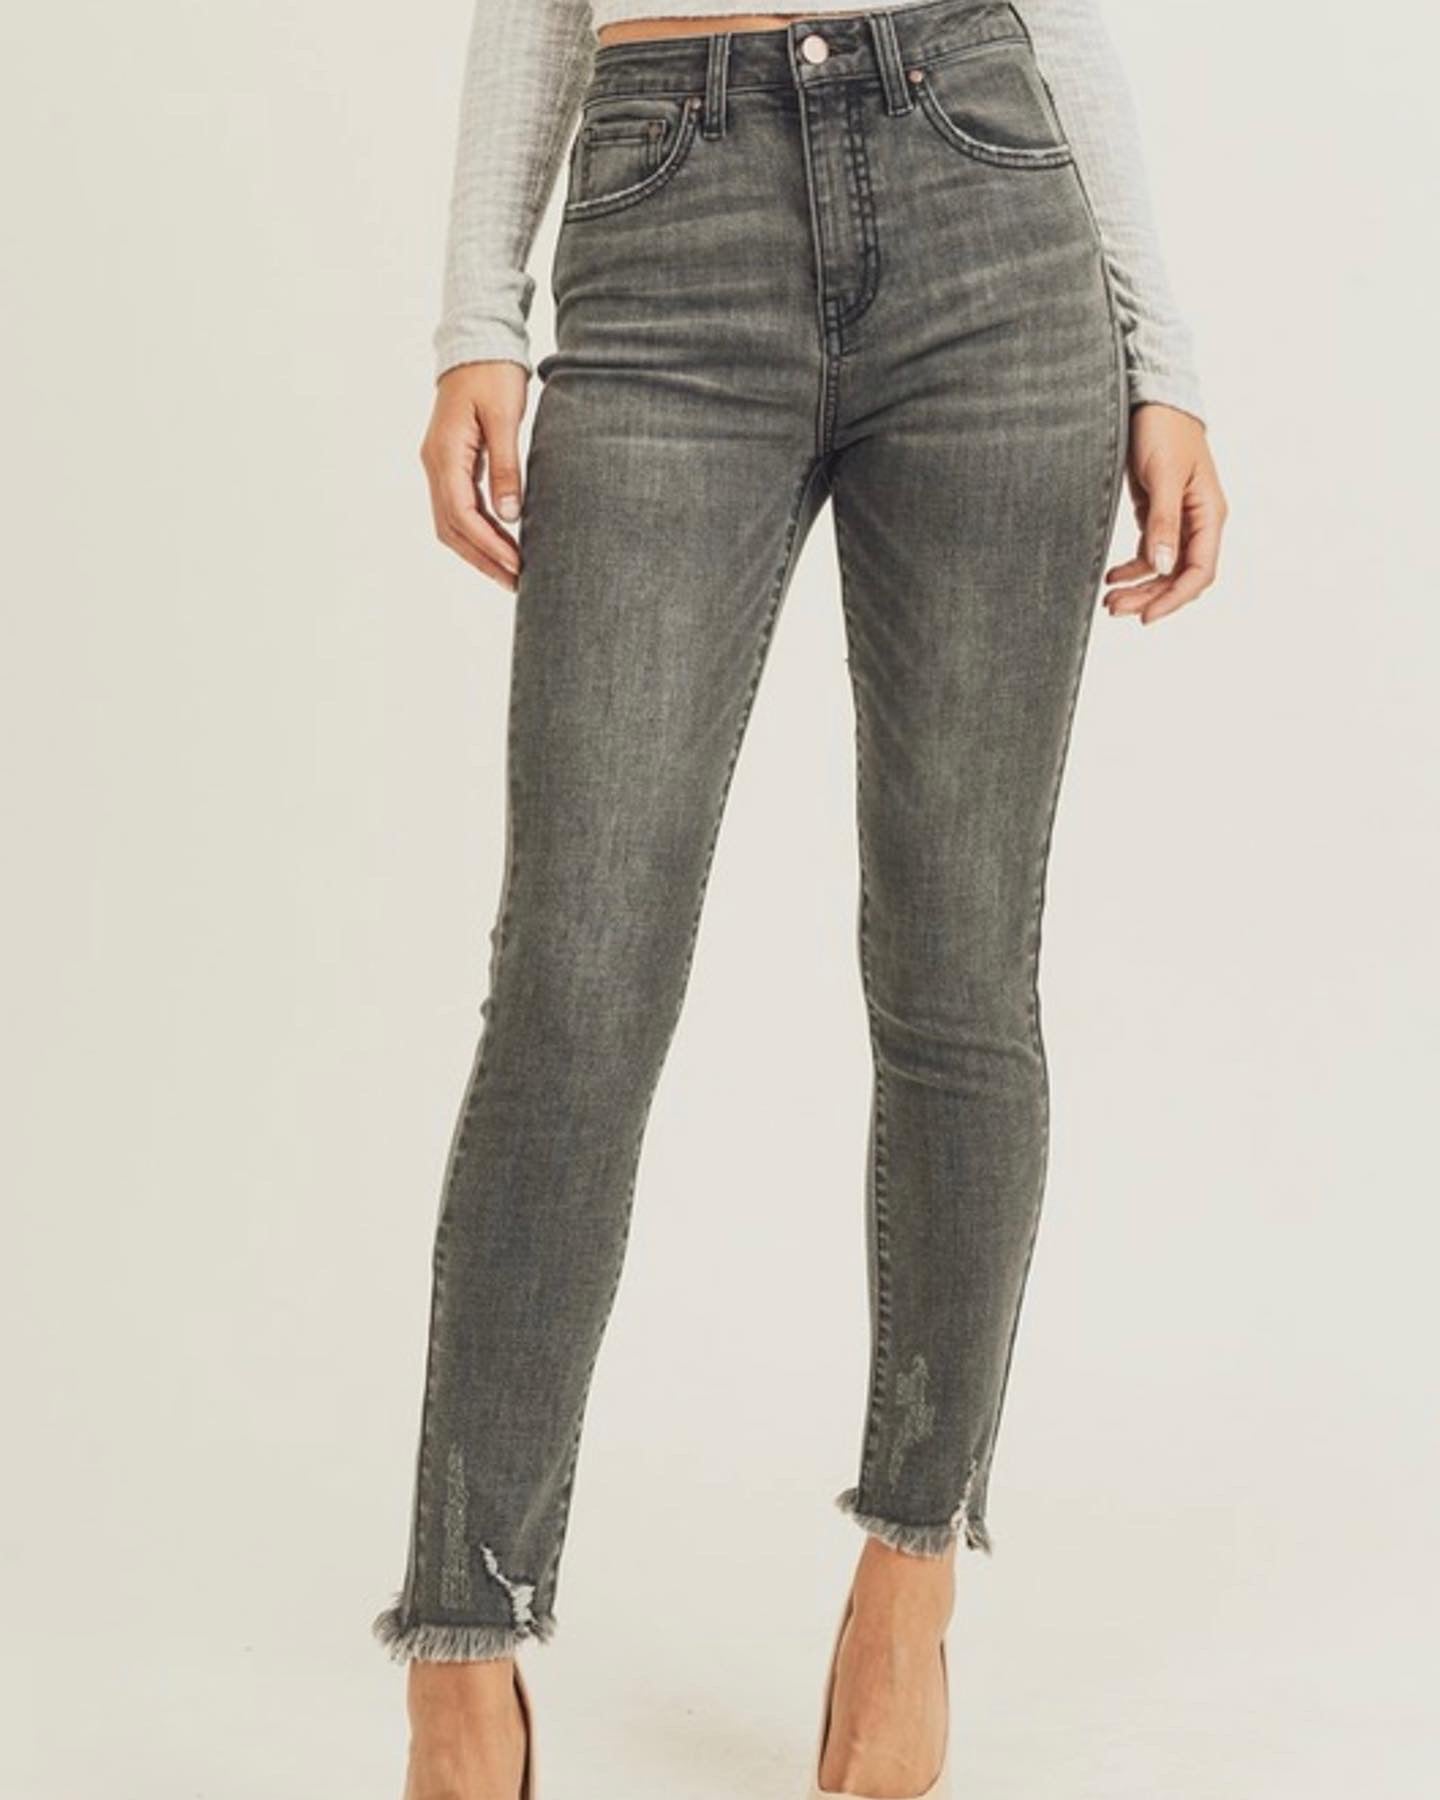 Golden Touch High Rise Jeans #MK1838 – GRAY FASHION